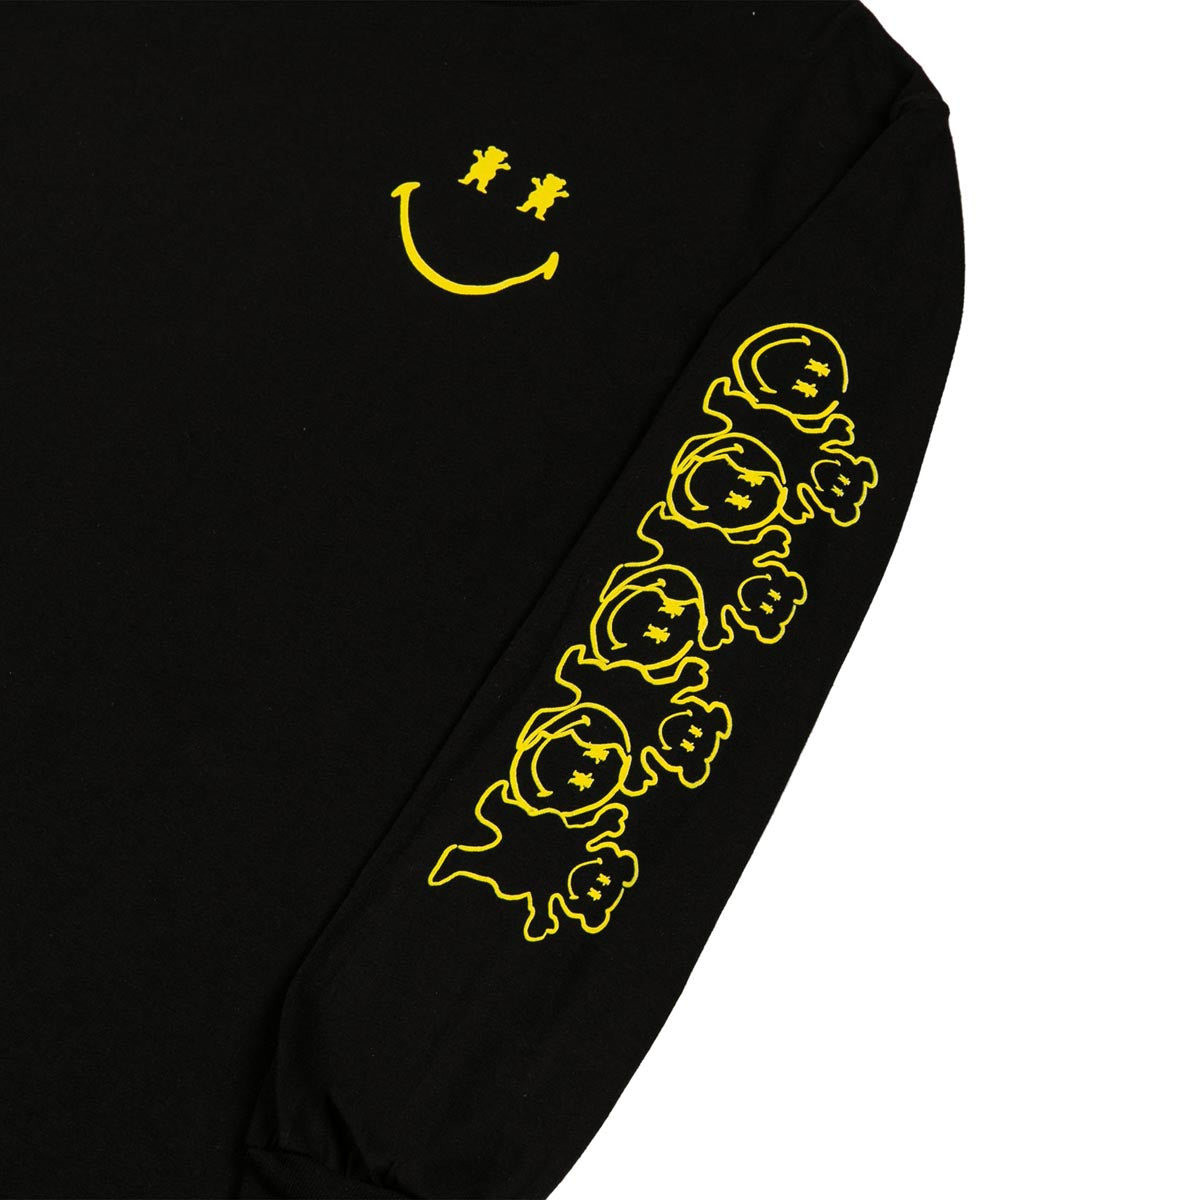 Grizzly x Smiley World Big Smile Long Sleeve T-Shirt - Black image 3